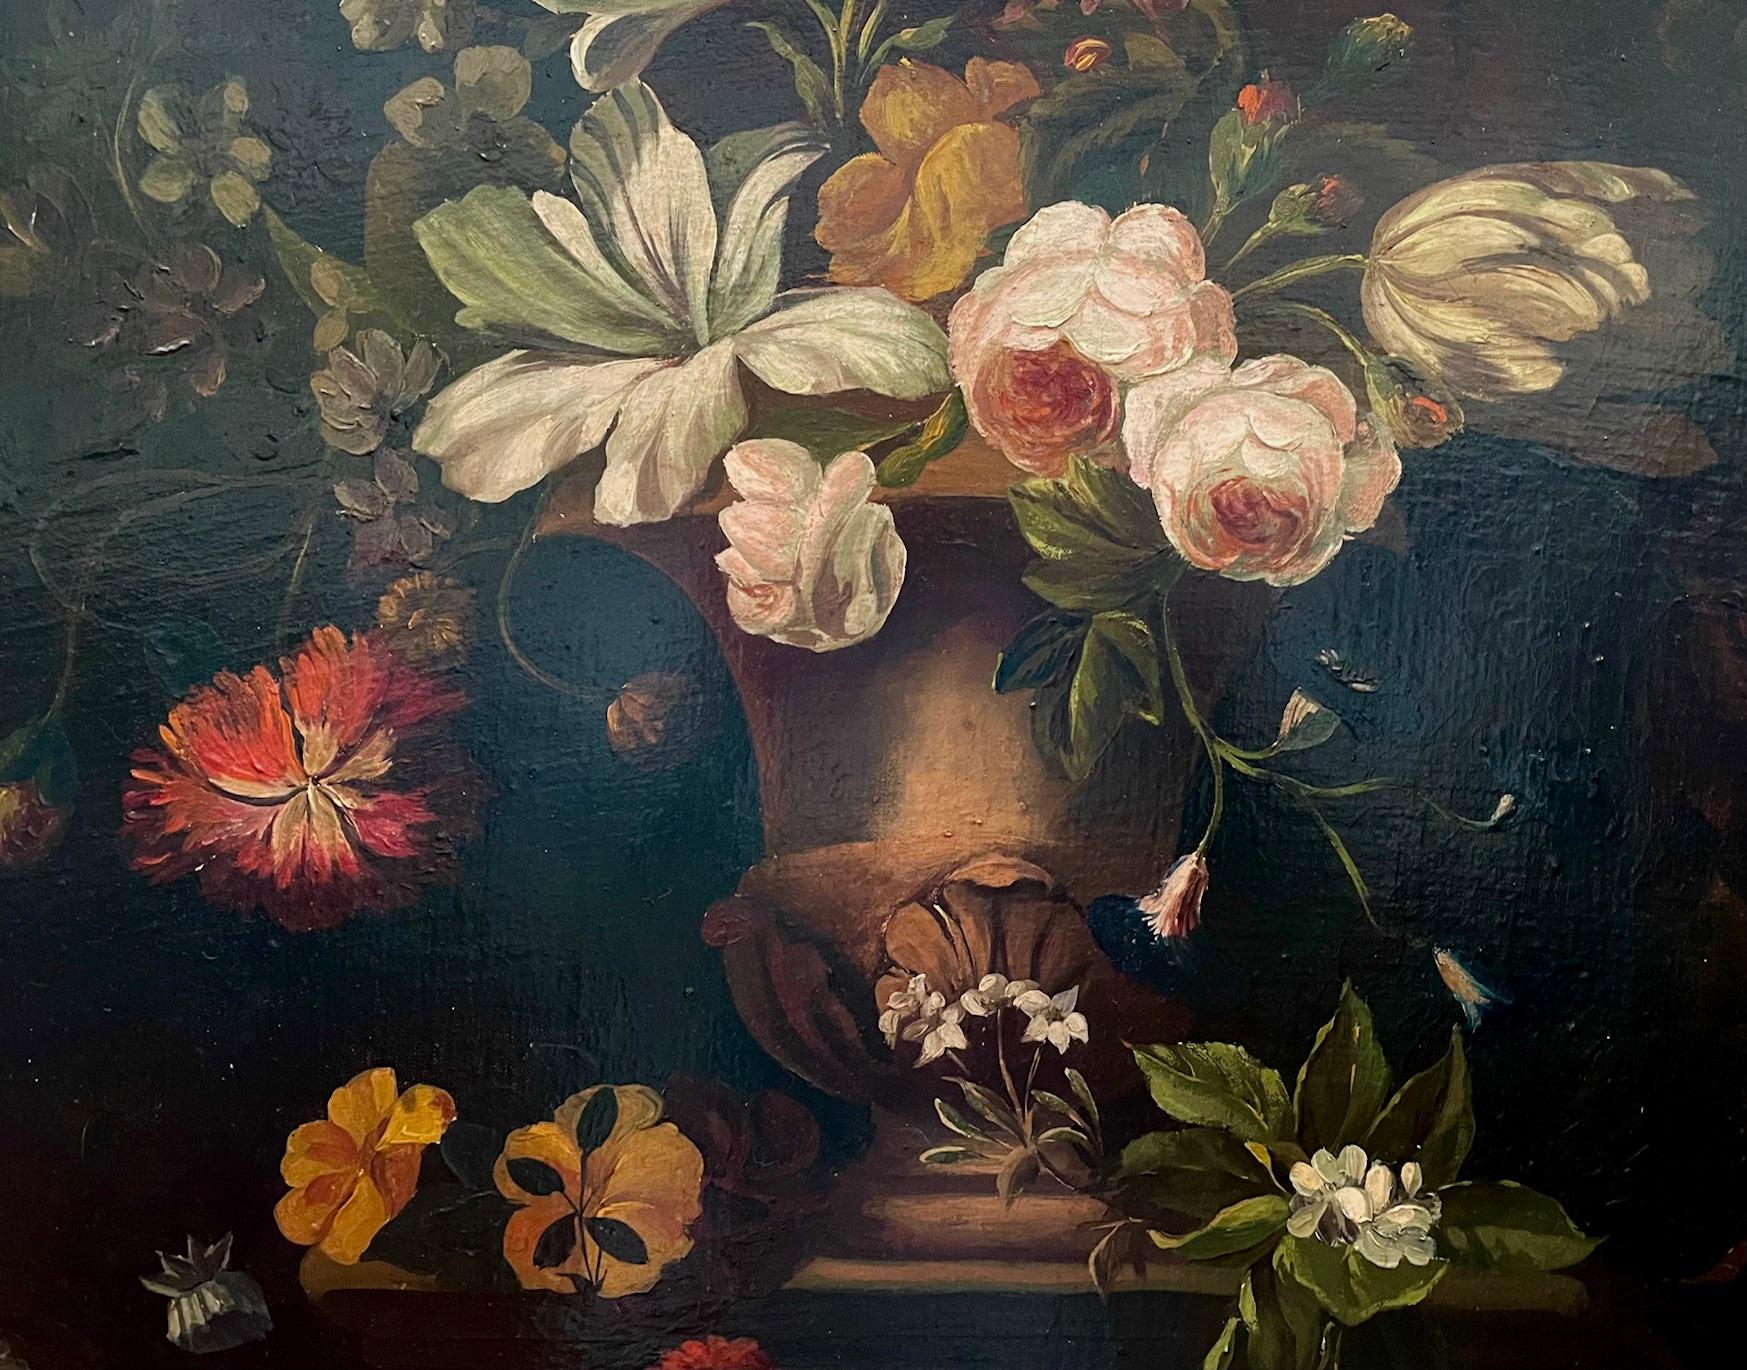  Floral with Urn is in a classical Dutch style that dates to the 17th century. The bright flowers drape the urn in whites, crimsons and pinks, standing out against the darker foliage and flowers on a dark background. 

The artist is unknown and the